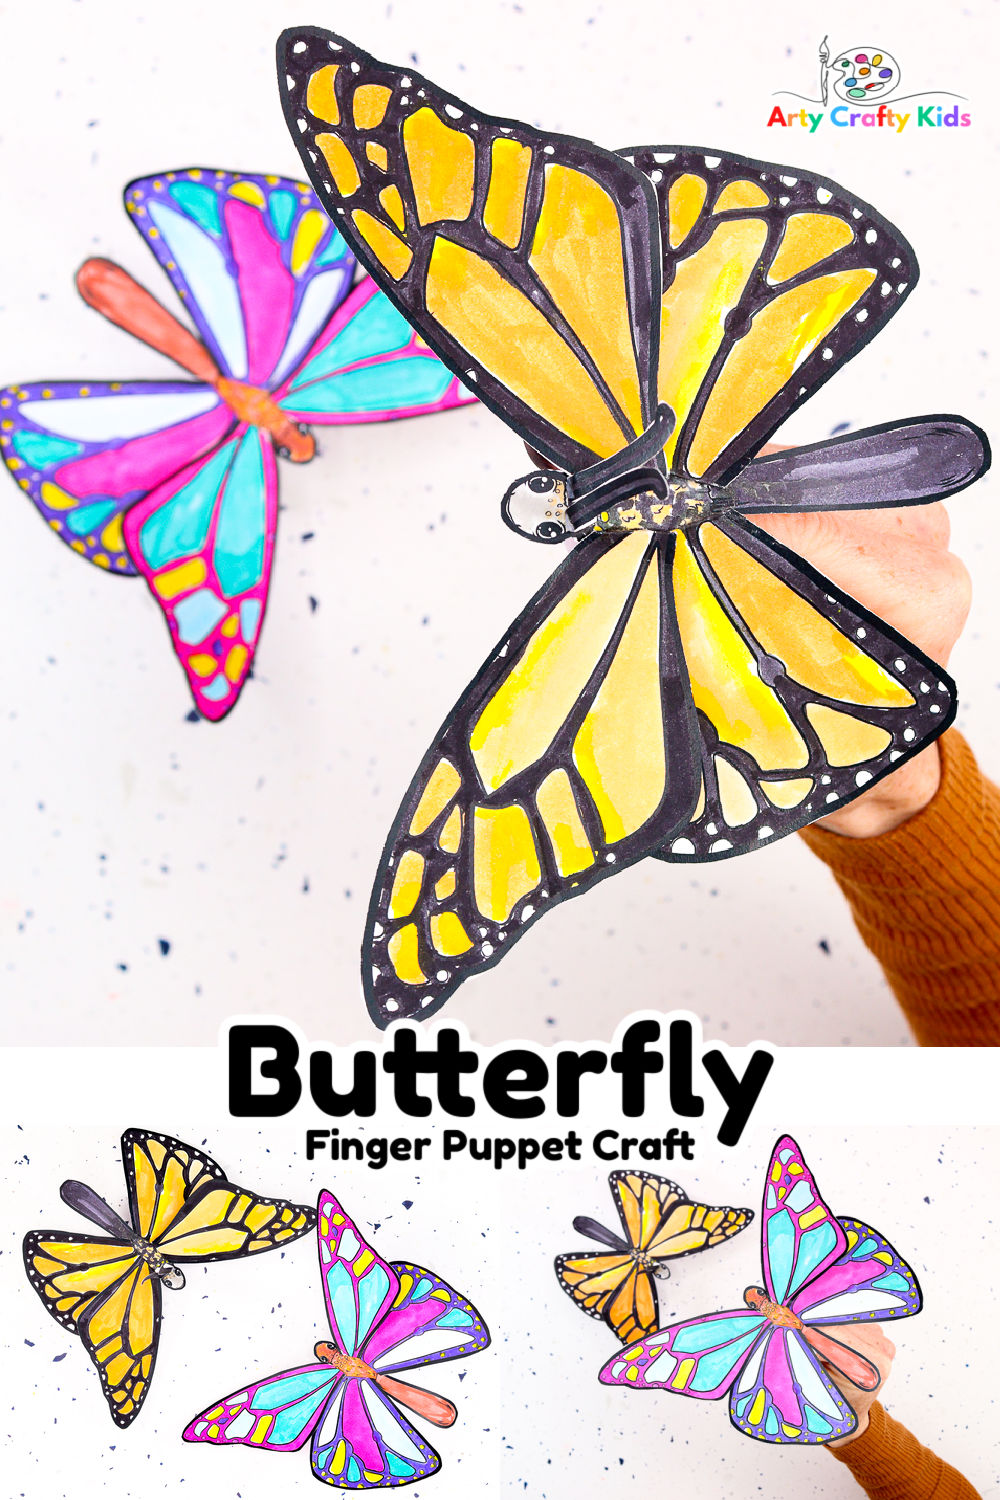 Craft meets play with this fun and easy Butterfly Finger Puppet Craft. Start with downloading the printable butterfly template and color, make and play! This craft is perfect for kids who love butterflies and hands-on fun.